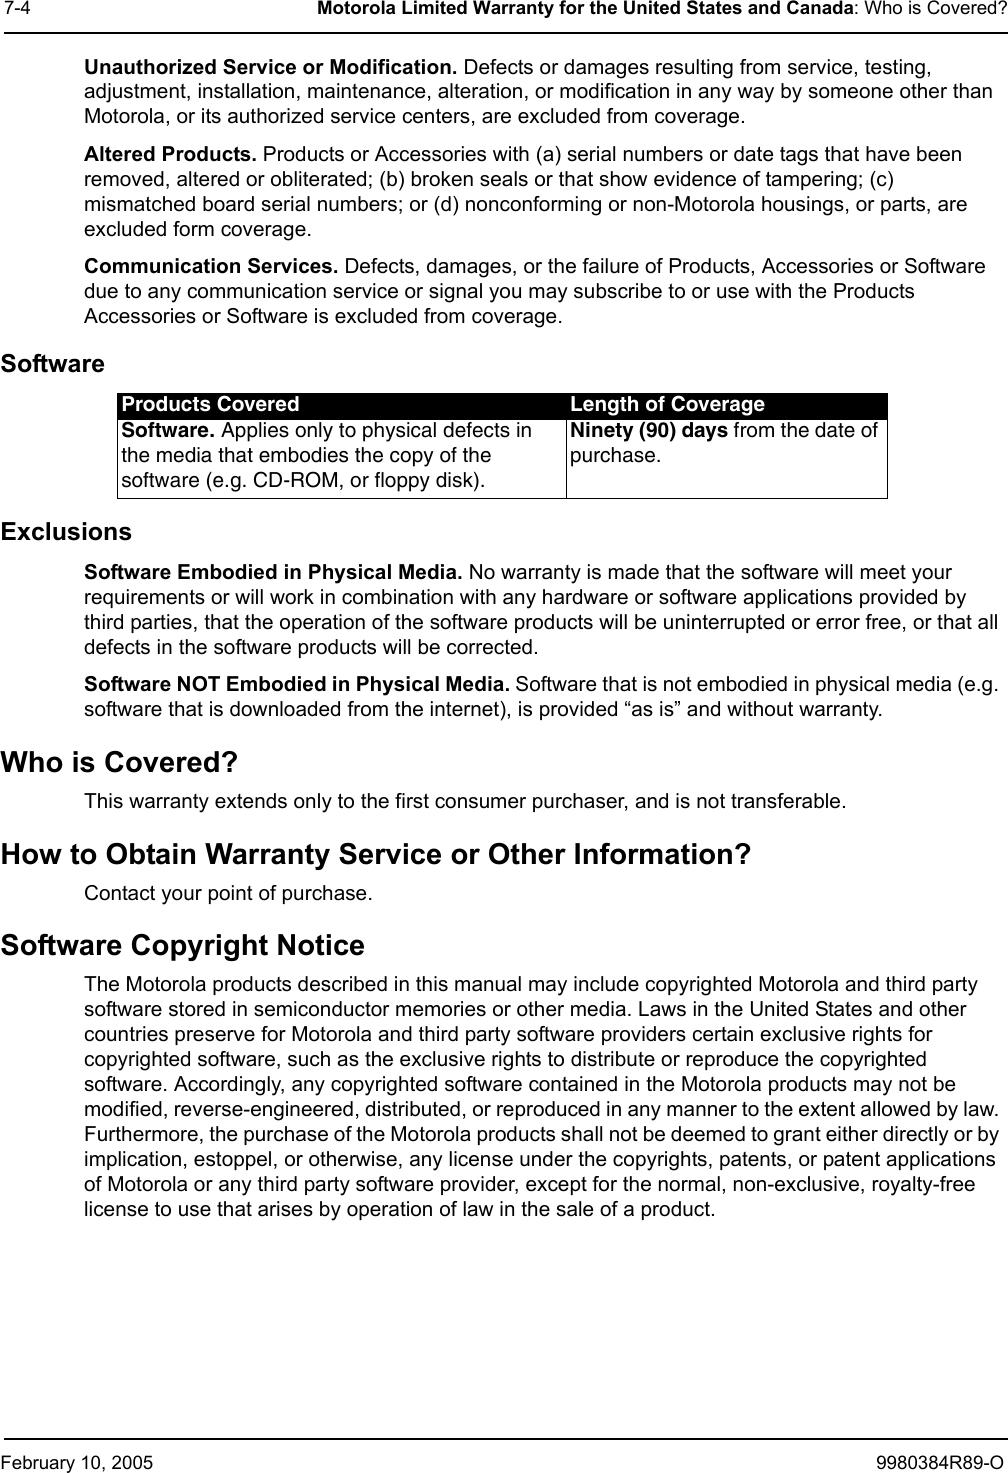 February 10, 2005 9980384R89-O7-4 Motorola Limited Warranty for the United States and Canada: Who is Covered?Unauthorized Service or Modification. Defects or damages resulting from service, testing, adjustment, installation, maintenance, alteration, or modification in any way by someone other than Motorola, or its authorized service centers, are excluded from coverage.Altered Products. Products or Accessories with (a) serial numbers or date tags that have been removed, altered or obliterated; (b) broken seals or that show evidence of tampering; (c) mismatched board serial numbers; or (d) nonconforming or non-Motorola housings, or parts, are excluded form coverage.Communication Services. Defects, damages, or the failure of Products, Accessories or Software due to any communication service or signal you may subscribe to or use with the Products Accessories or Software is excluded from coverage.SoftwareExclusionsSoftware Embodied in Physical Media. No warranty is made that the software will meet your requirements or will work in combination with any hardware or software applications provided by third parties, that the operation of the software products will be uninterrupted or error free, or that all defects in the software products will be corrected.Software NOT Embodied in Physical Media. Software that is not embodied in physical media (e.g. software that is downloaded from the internet), is provided “as is” and without warranty.Who is Covered?This warranty extends only to the first consumer purchaser, and is not transferable.How to Obtain Warranty Service or Other Information?Contact your point of purchase.Software Copyright NoticeThe Motorola products described in this manual may include copyrighted Motorola and third party software stored in semiconductor memories or other media. Laws in the United States and other countries preserve for Motorola and third party software providers certain exclusive rights for copyrighted software, such as the exclusive rights to distribute or reproduce the copyrighted software. Accordingly, any copyrighted software contained in the Motorola products may not be modified, reverse-engineered, distributed, or reproduced in any manner to the extent allowed by law. Furthermore, the purchase of the Motorola products shall not be deemed to grant either directly or by implication, estoppel, or otherwise, any license under the copyrights, patents, or patent applications of Motorola or any third party software provider, except for the normal, non-exclusive, royalty-free license to use that arises by operation of law in the sale of a product.Products Covered Length of CoverageSoftware. Applies only to physical defects in the media that embodies the copy of the software (e.g. CD-ROM, or floppy disk).Ninety (90) days from the date of purchase.